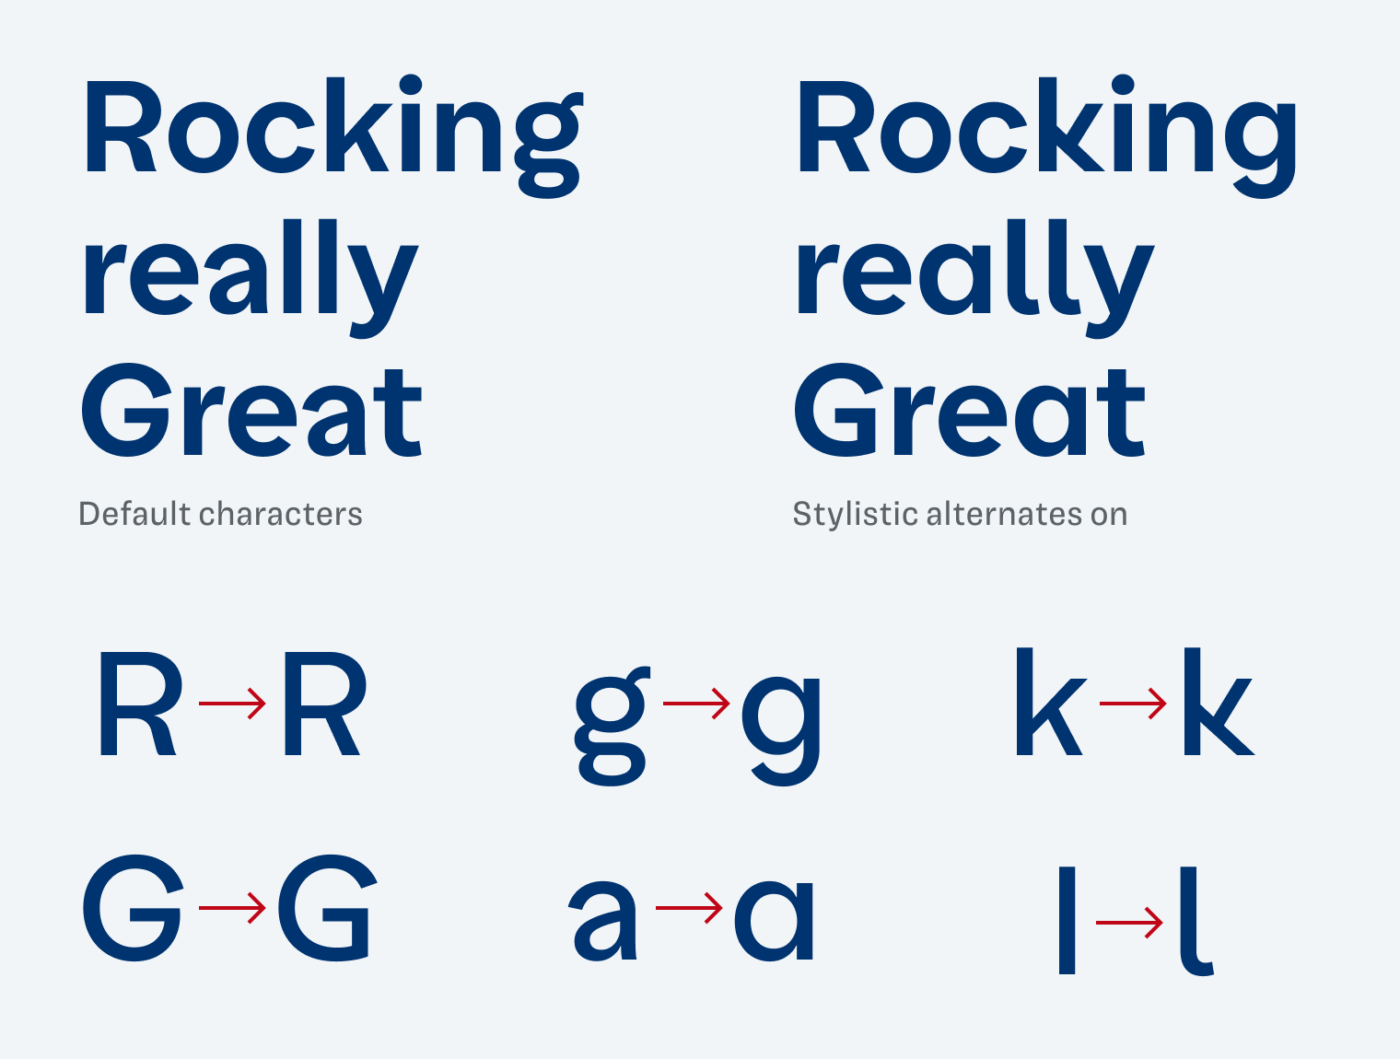 Rocking really great. Showing stylistic alternates of upper-case “R”, “G” and lower case “g”, “a”, “l”, and “k”.